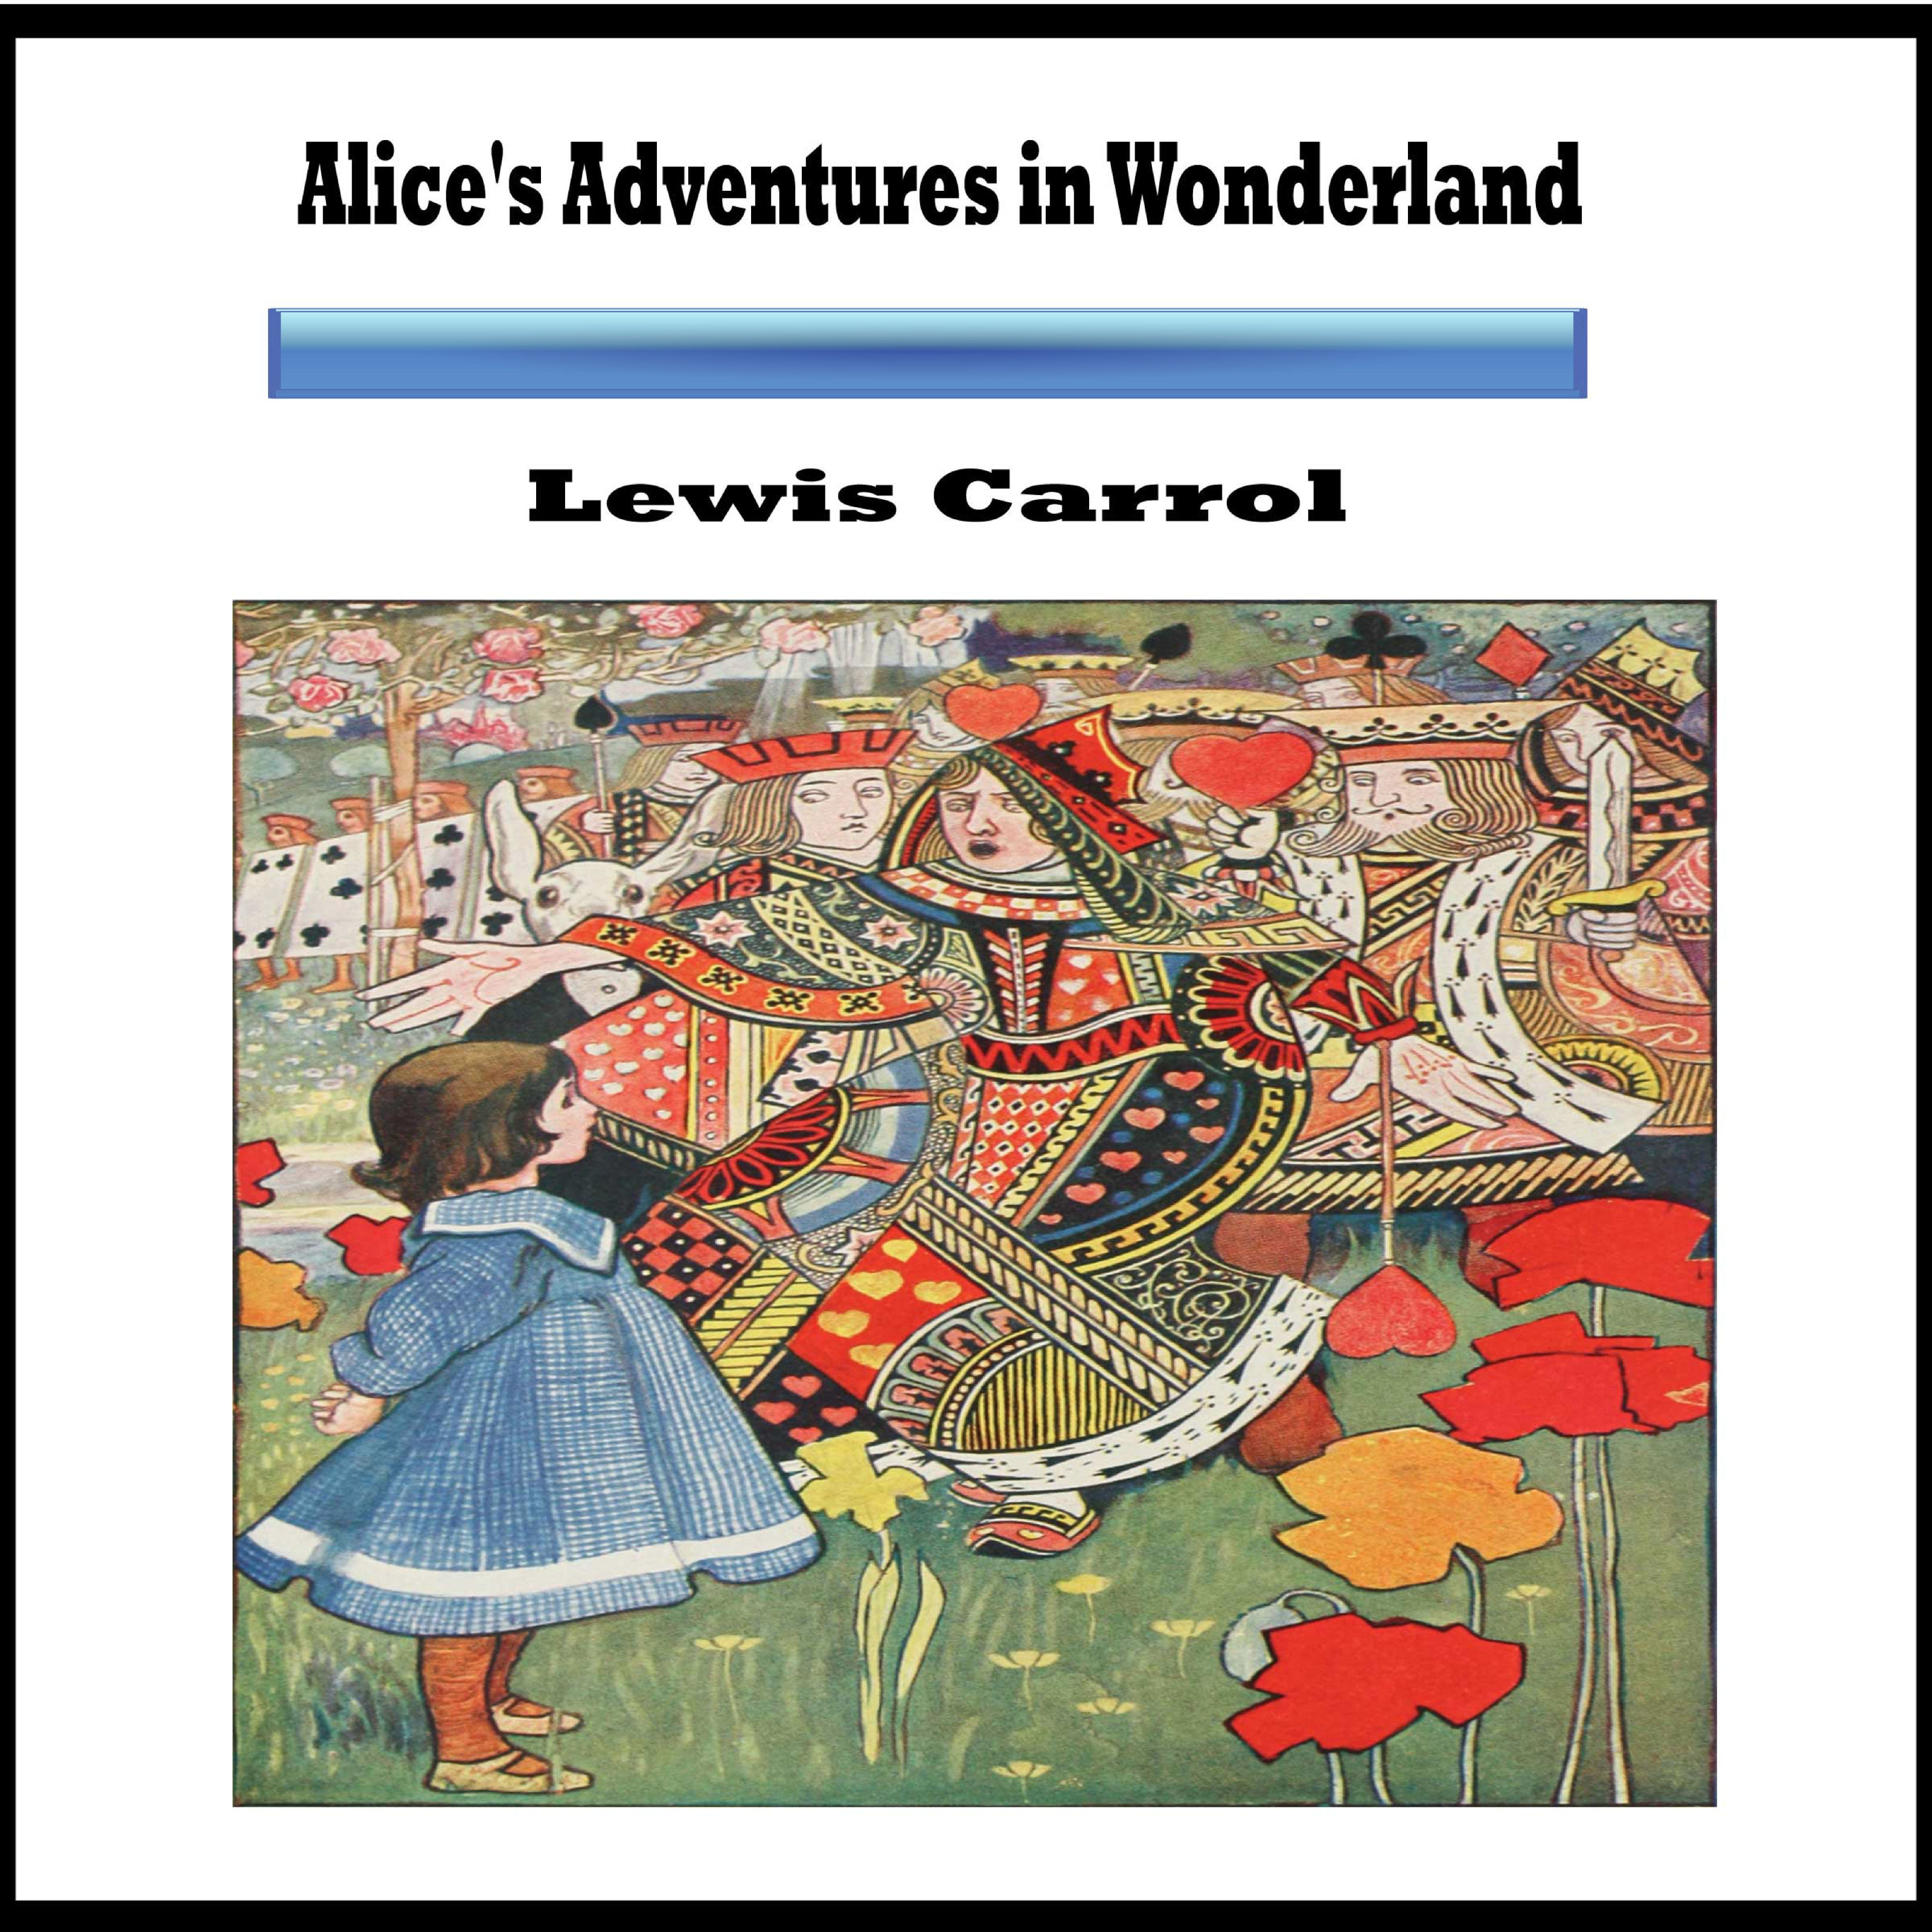 Lewis Carroll: Alice's Adventures in Wonderland, Chapter 1: Down the Rabbit Hole